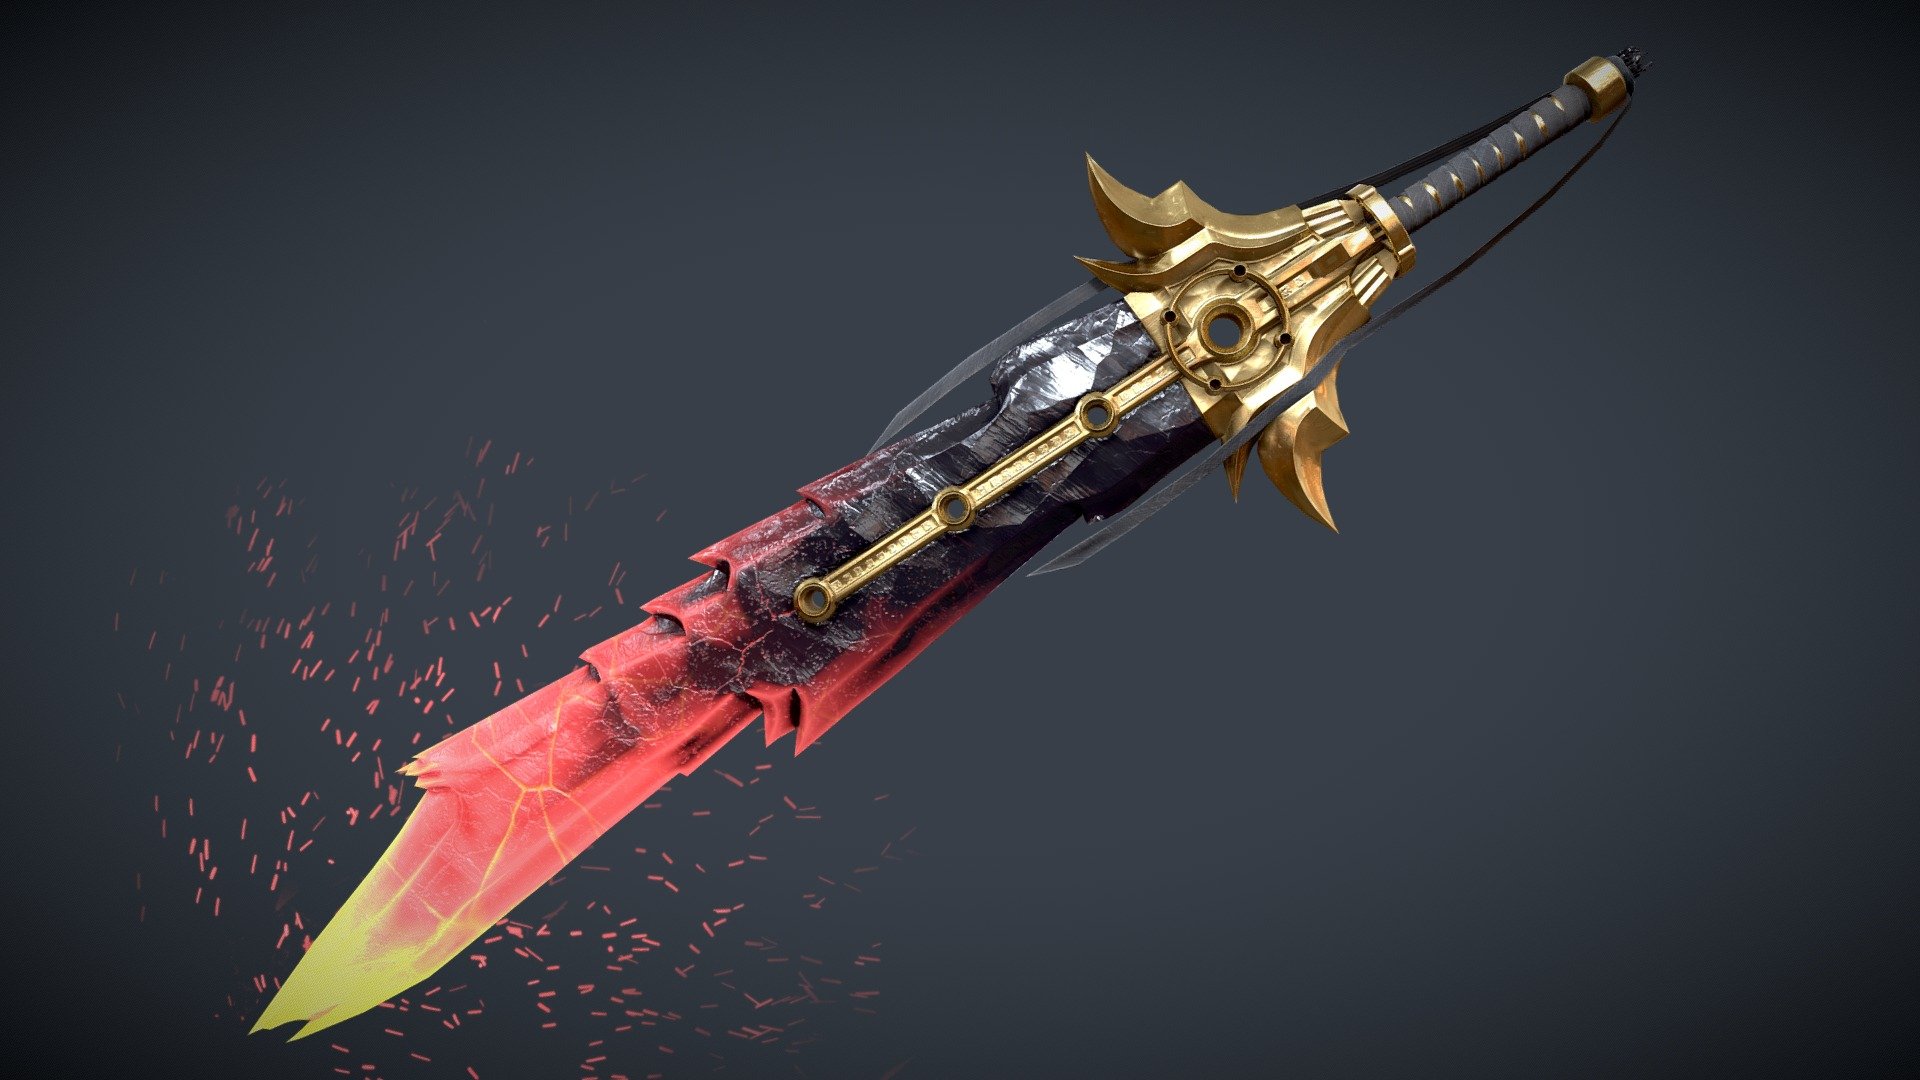 Legendary golden obsidian sword with the power to unleash lava with each swing. 7893 polys and 4k textures. Renders can be found here: https://www.artstation.com/artwork/WBB56E - Obsidian Sword - 3D model by Fabian Espinosa (@FabianEspinosa) 3d model